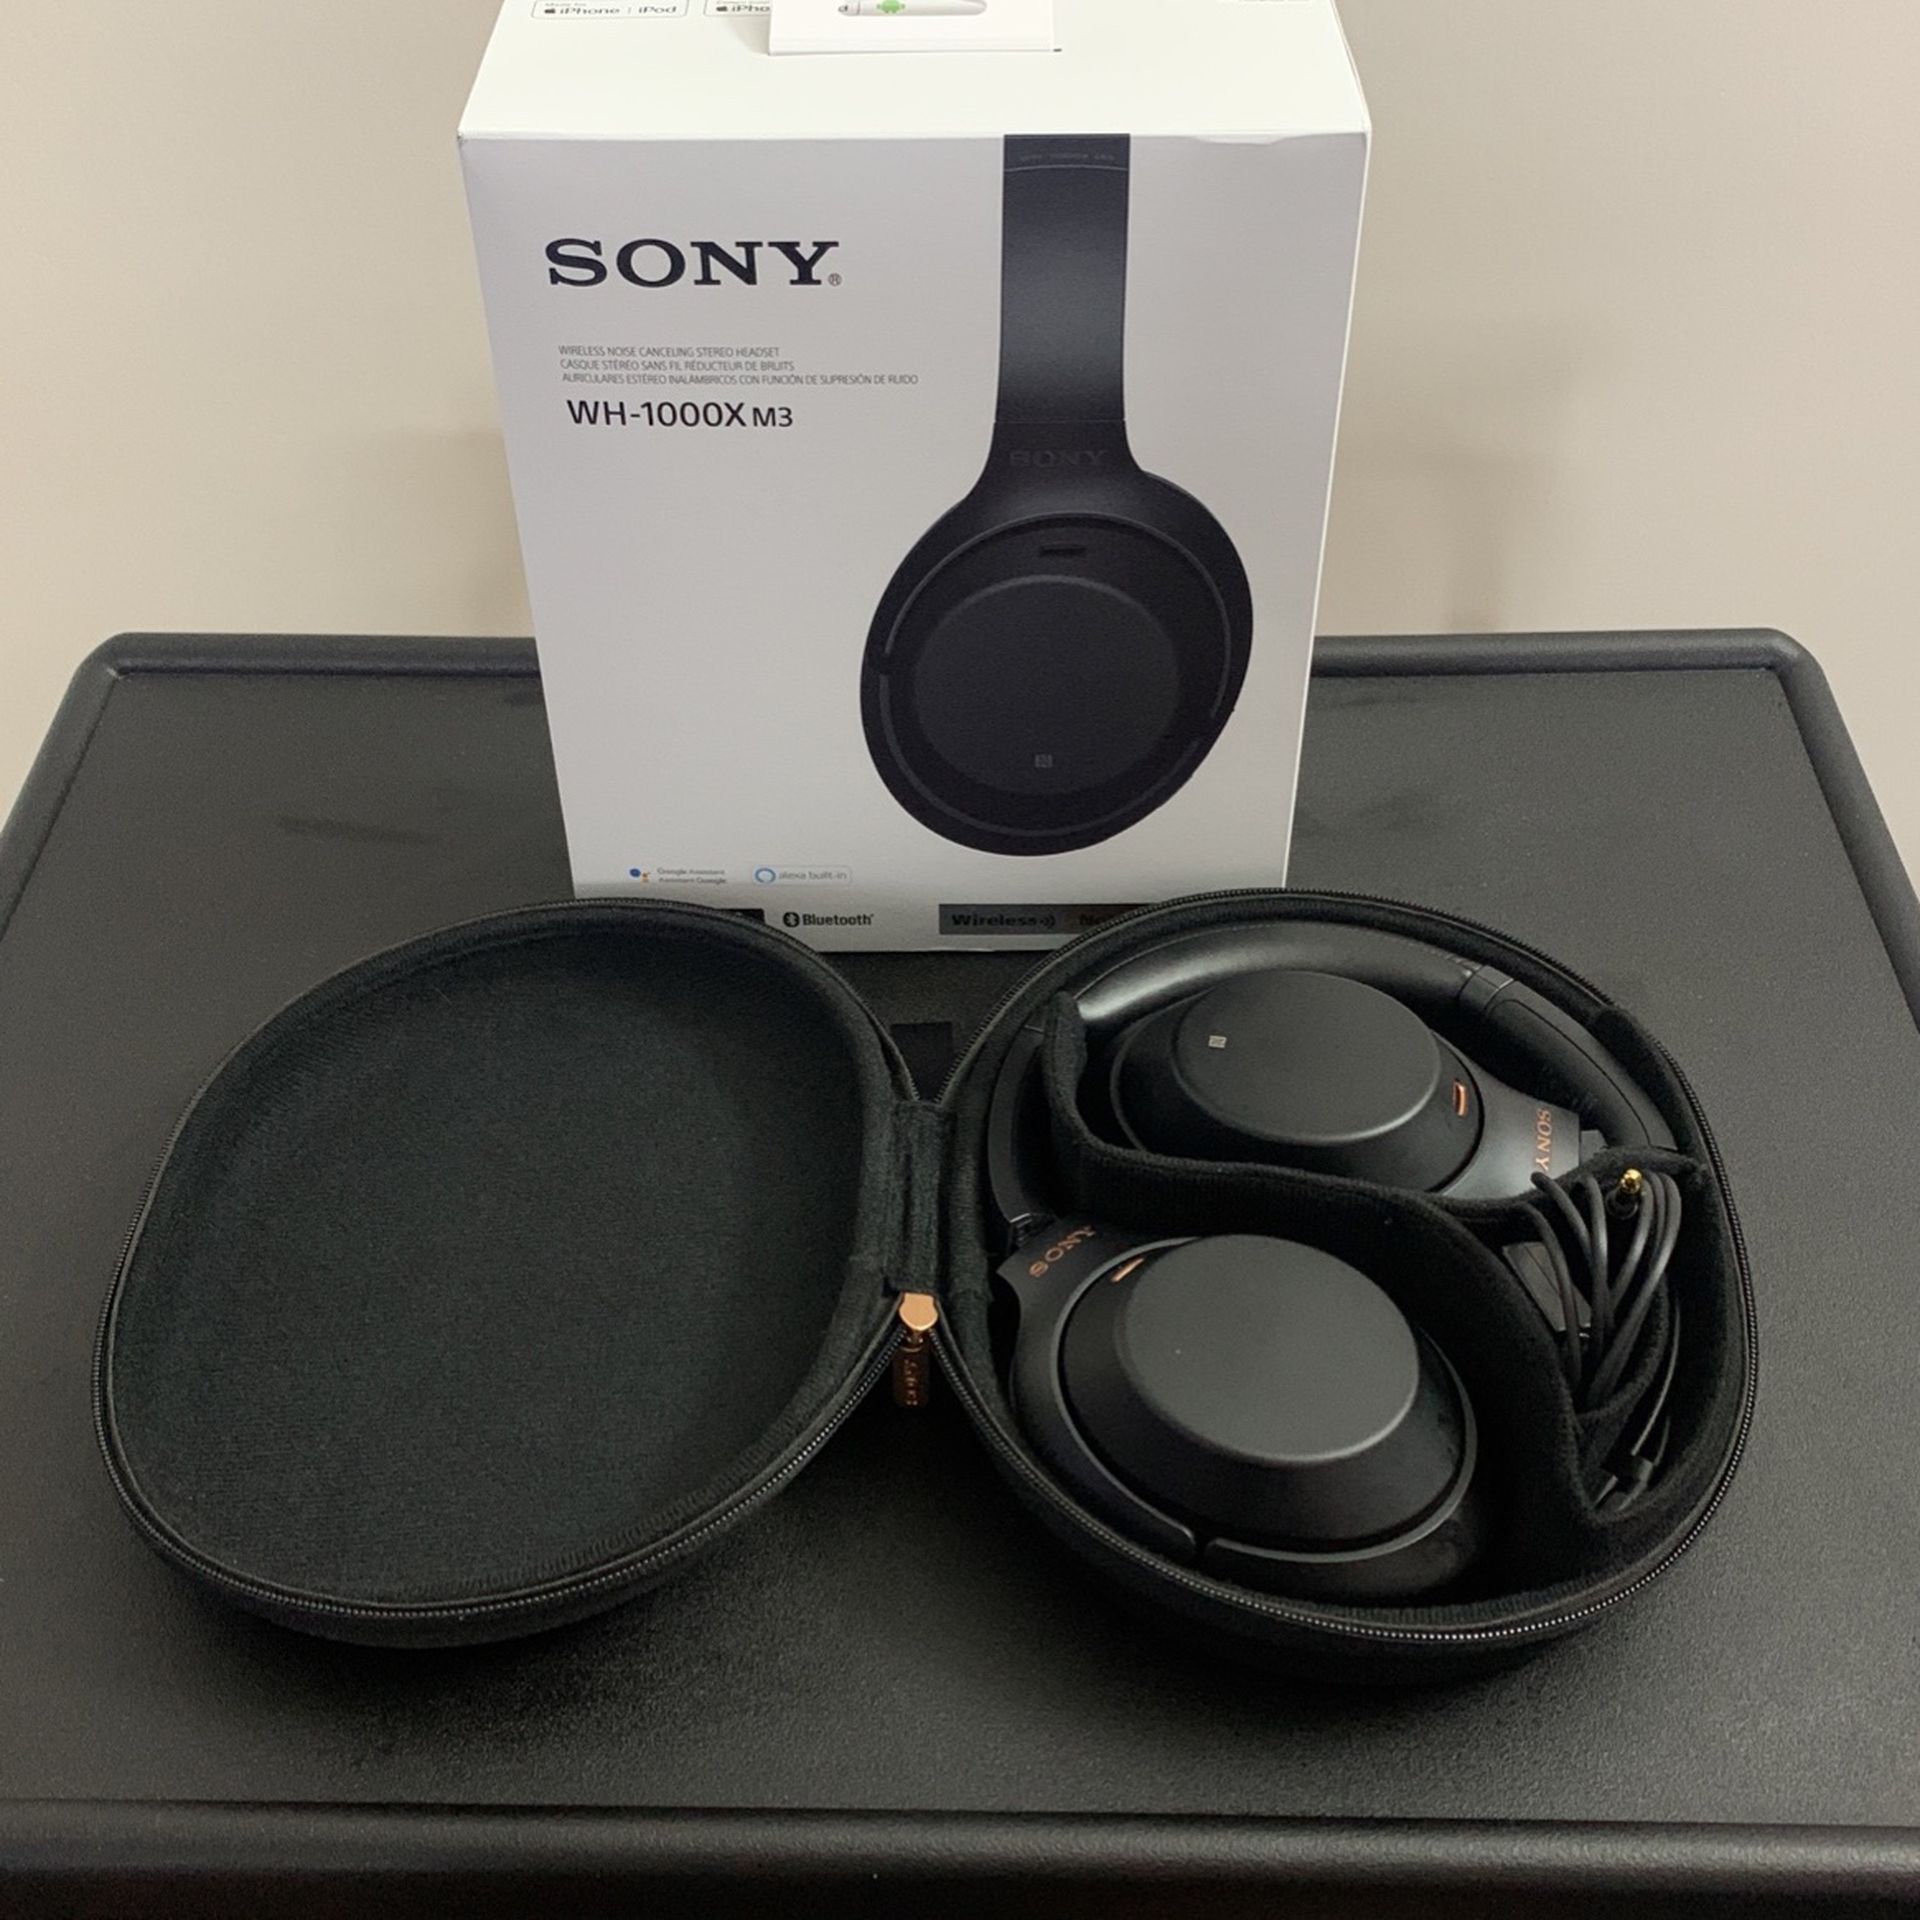 SONY WH-1000X M3 Noise Cancelling Wireless Headphones (Black)